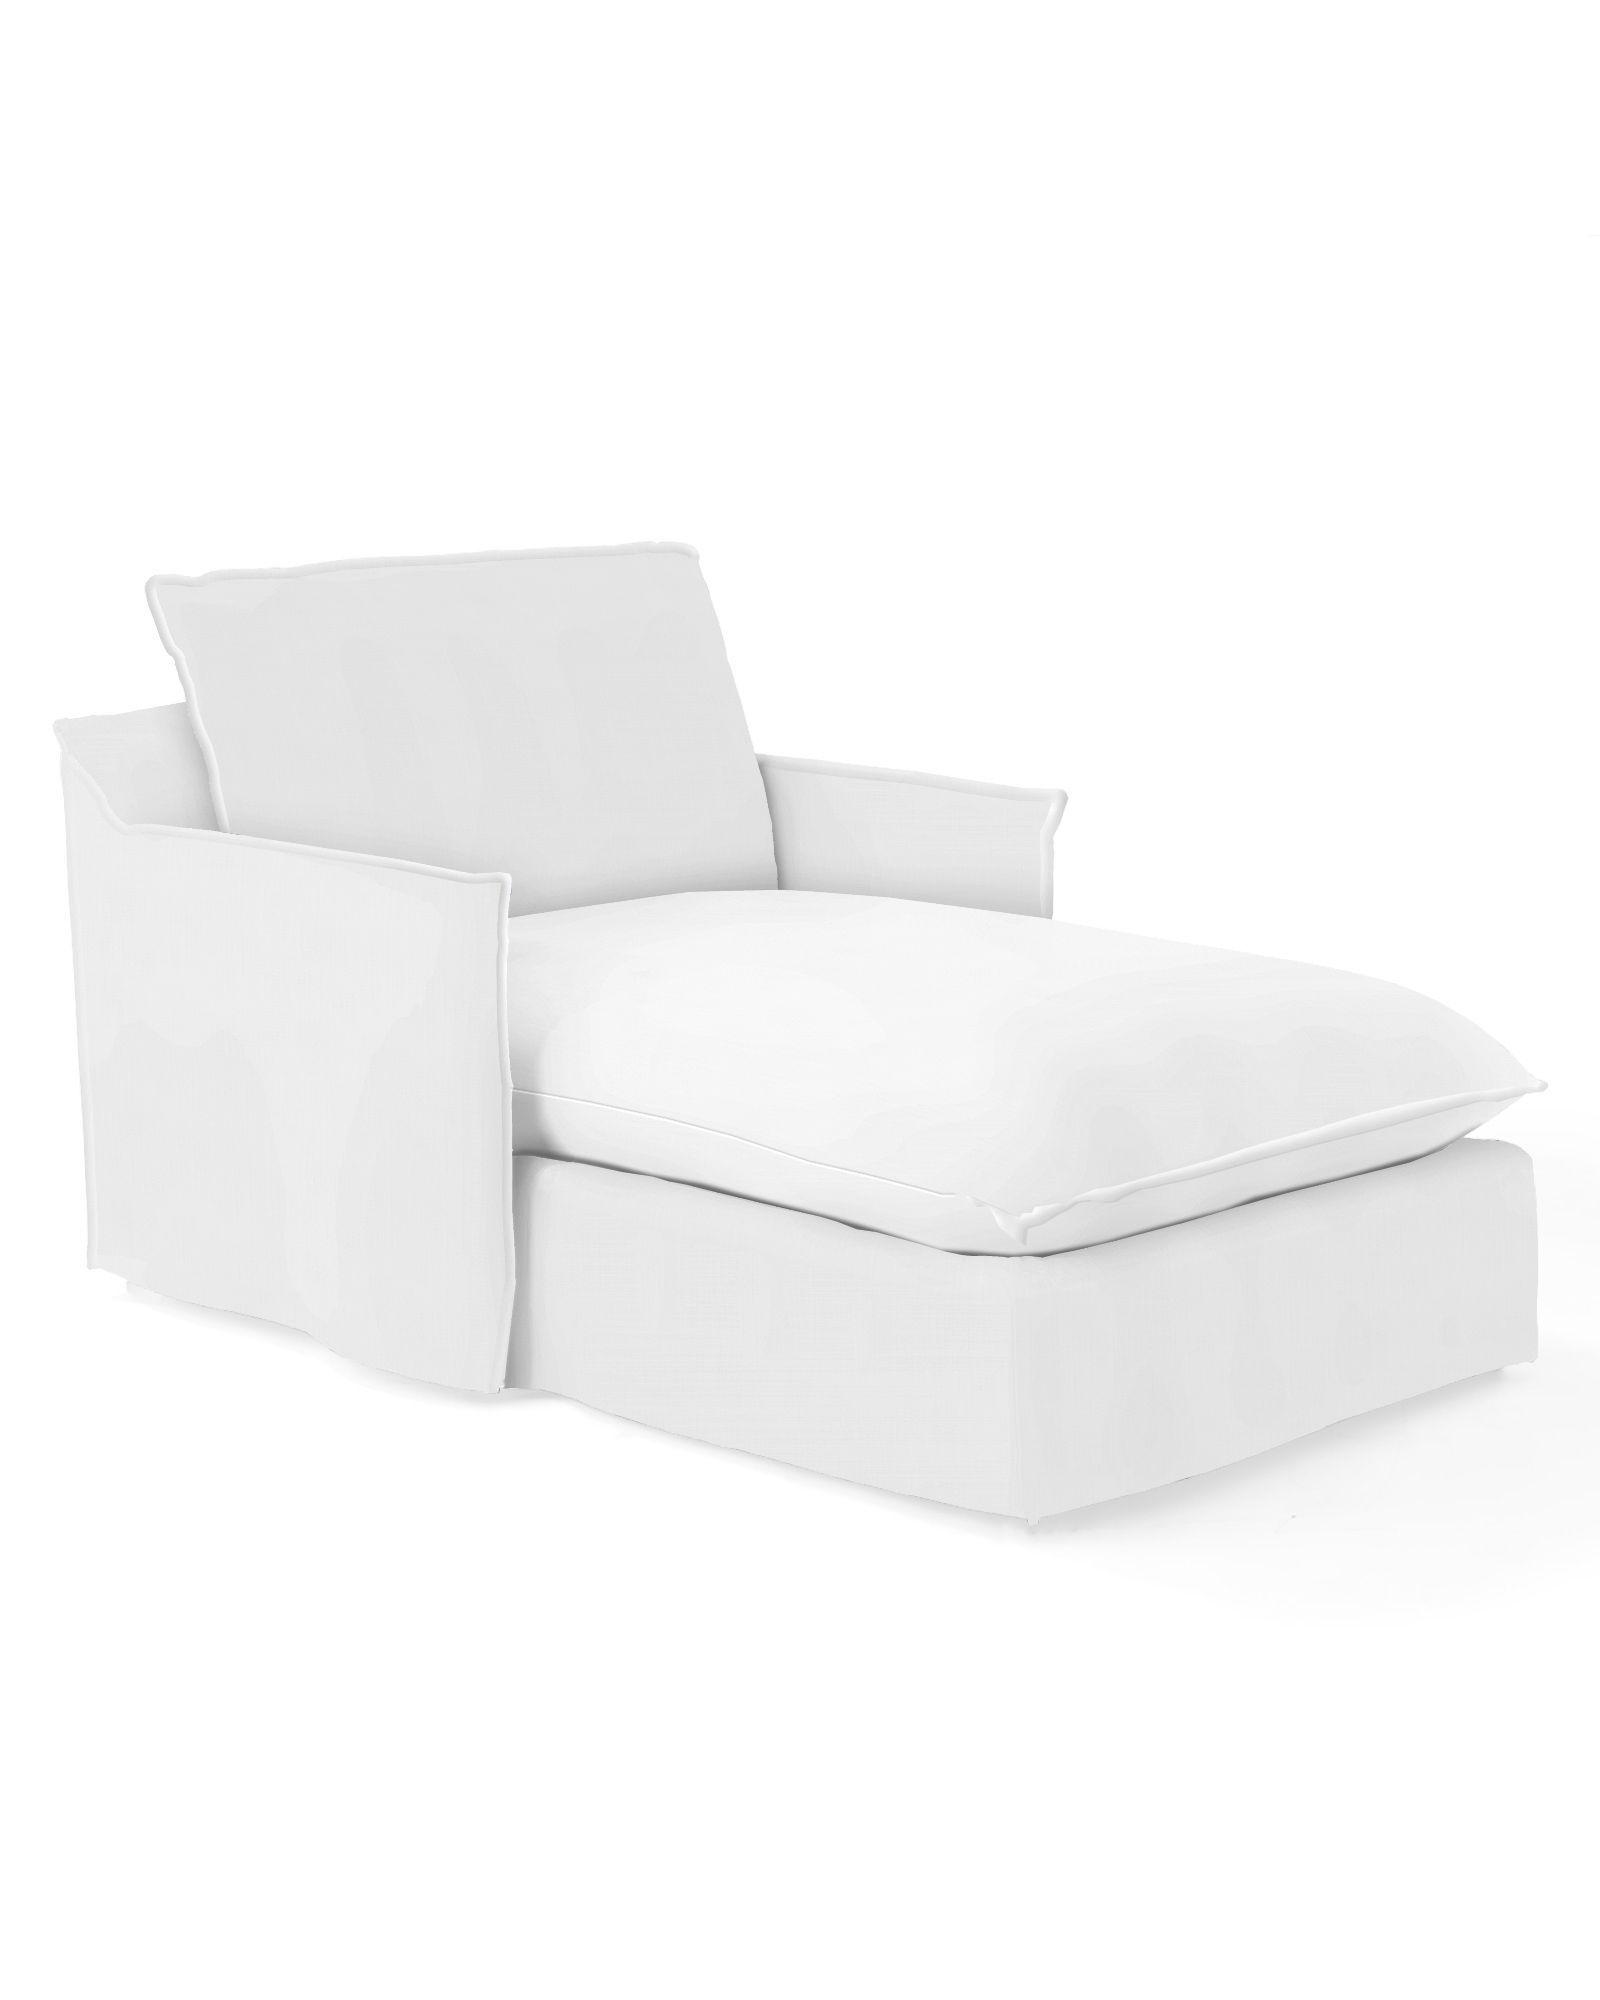 Sundial Wide Chaise | Serena and Lily